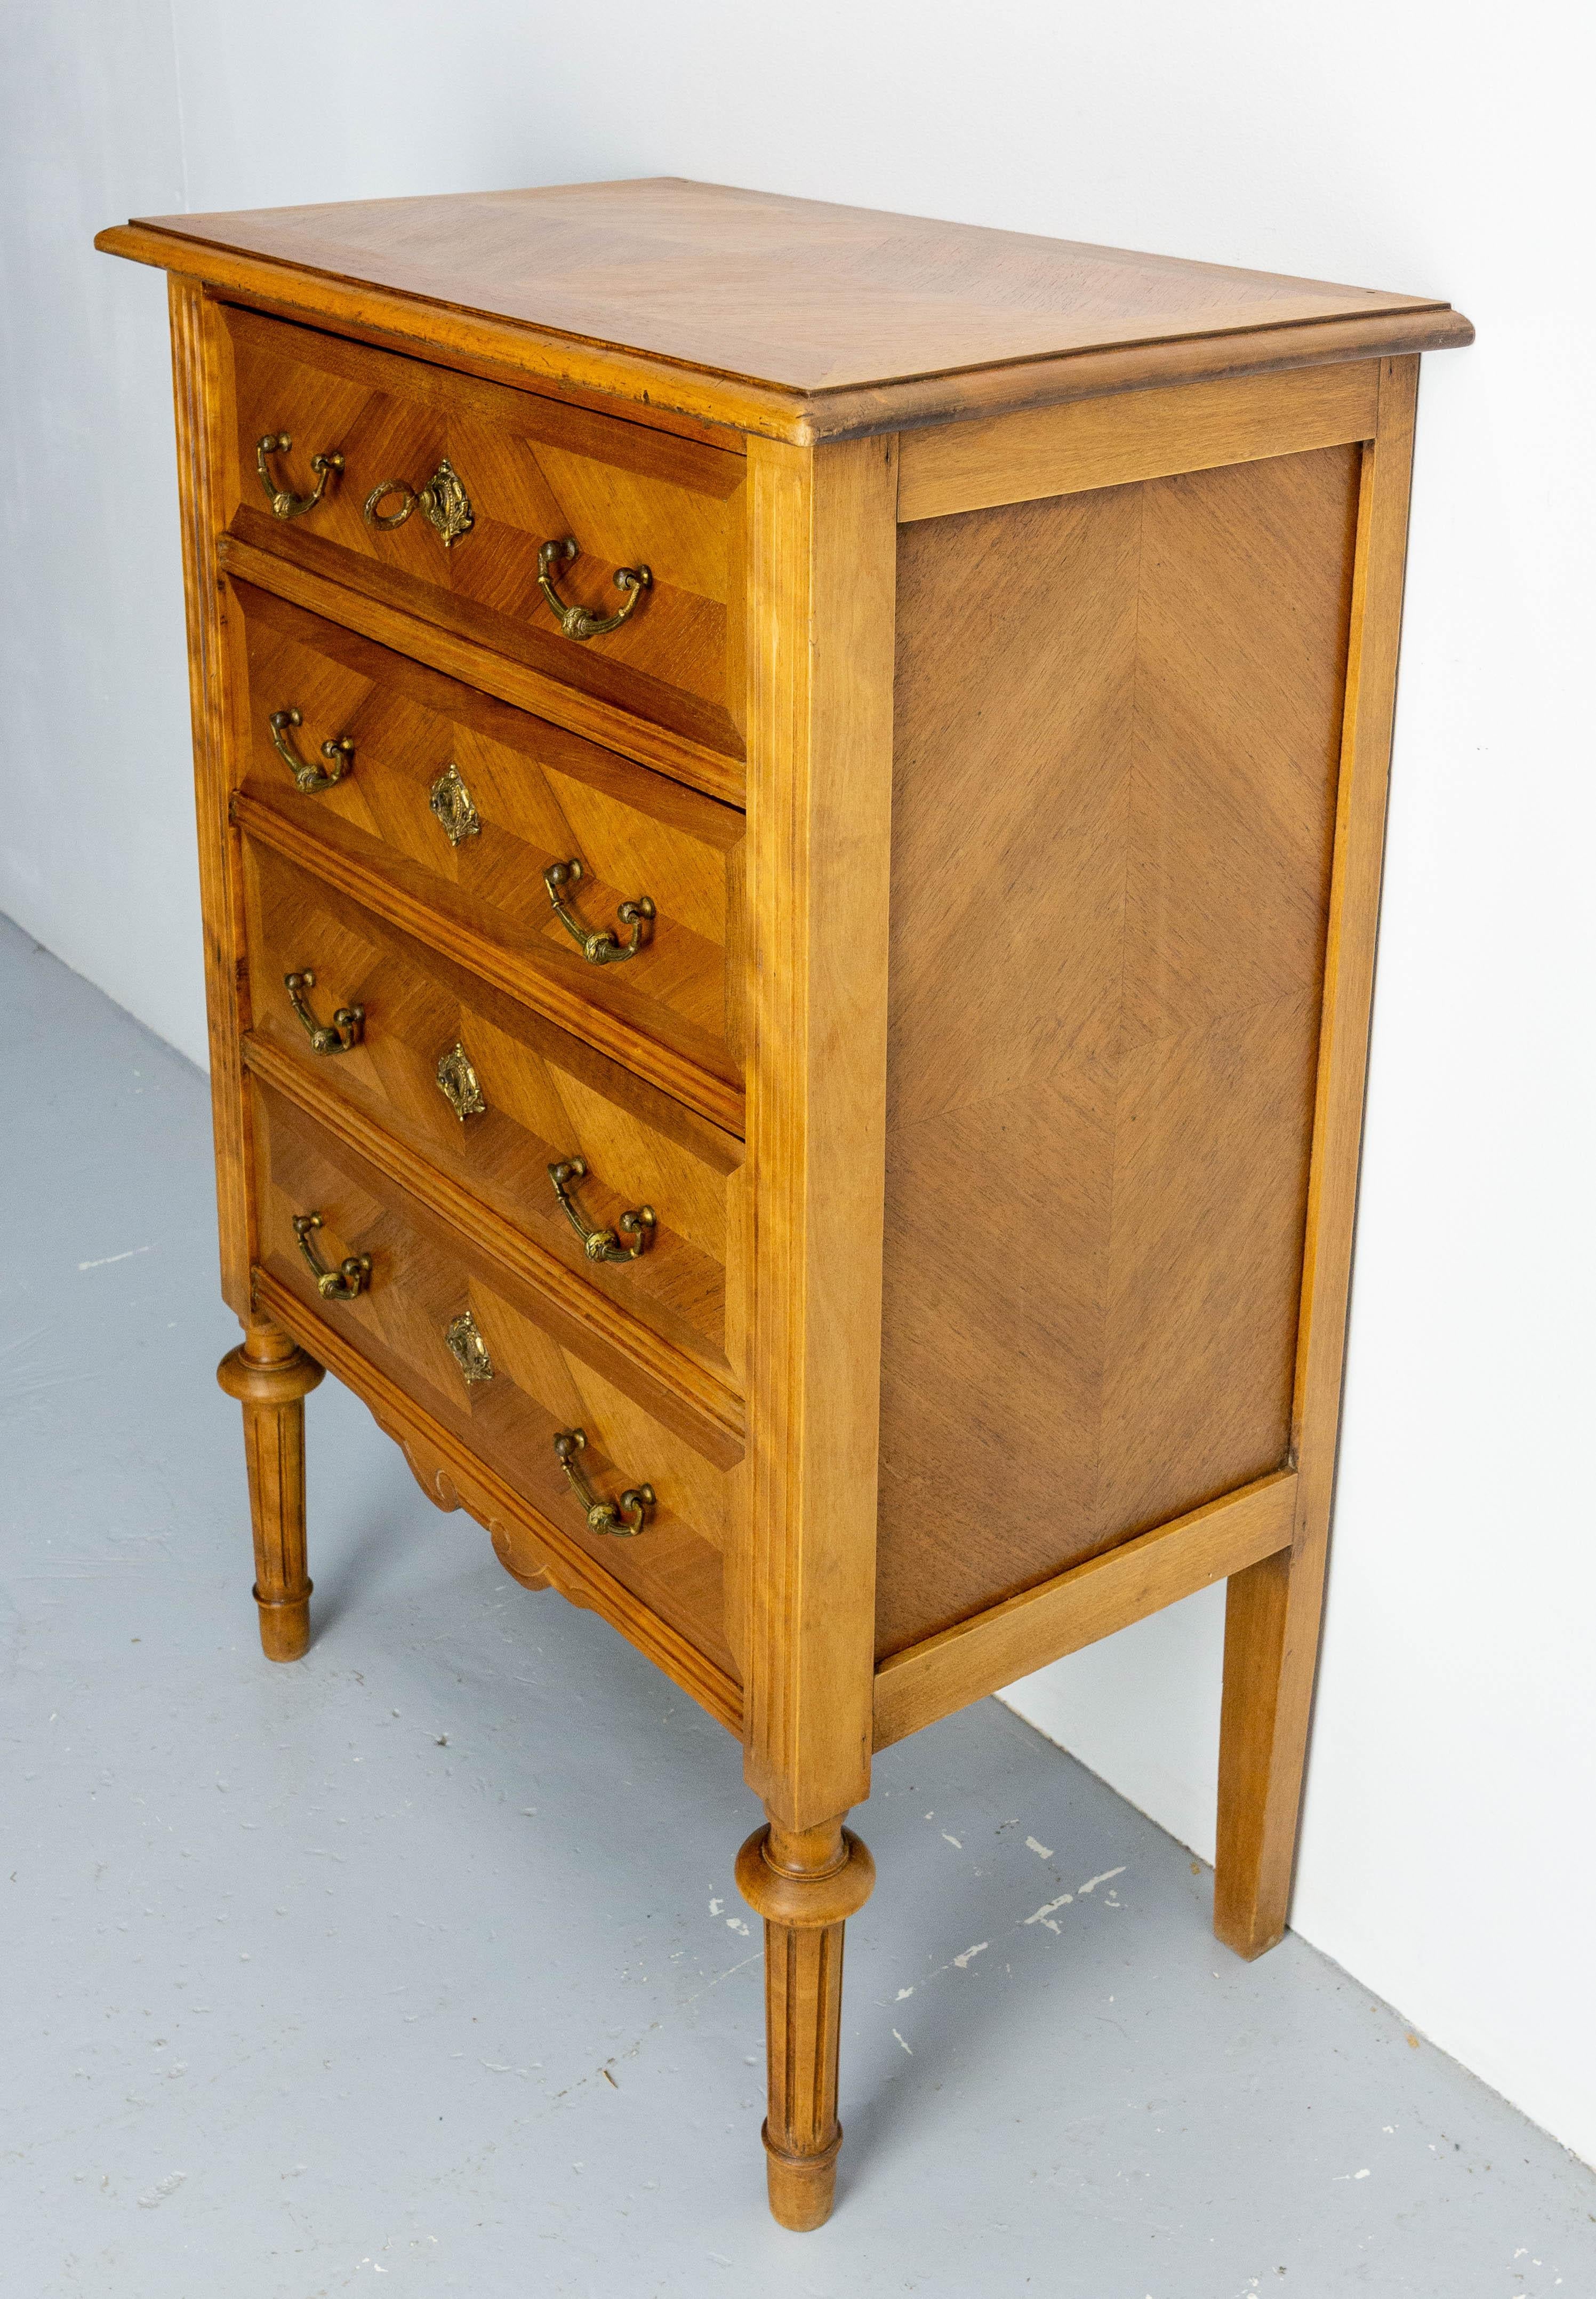 20th Century French Louis XVI Style Walnut Commode Chiffonnier Chest of Drawers, Circa 1900